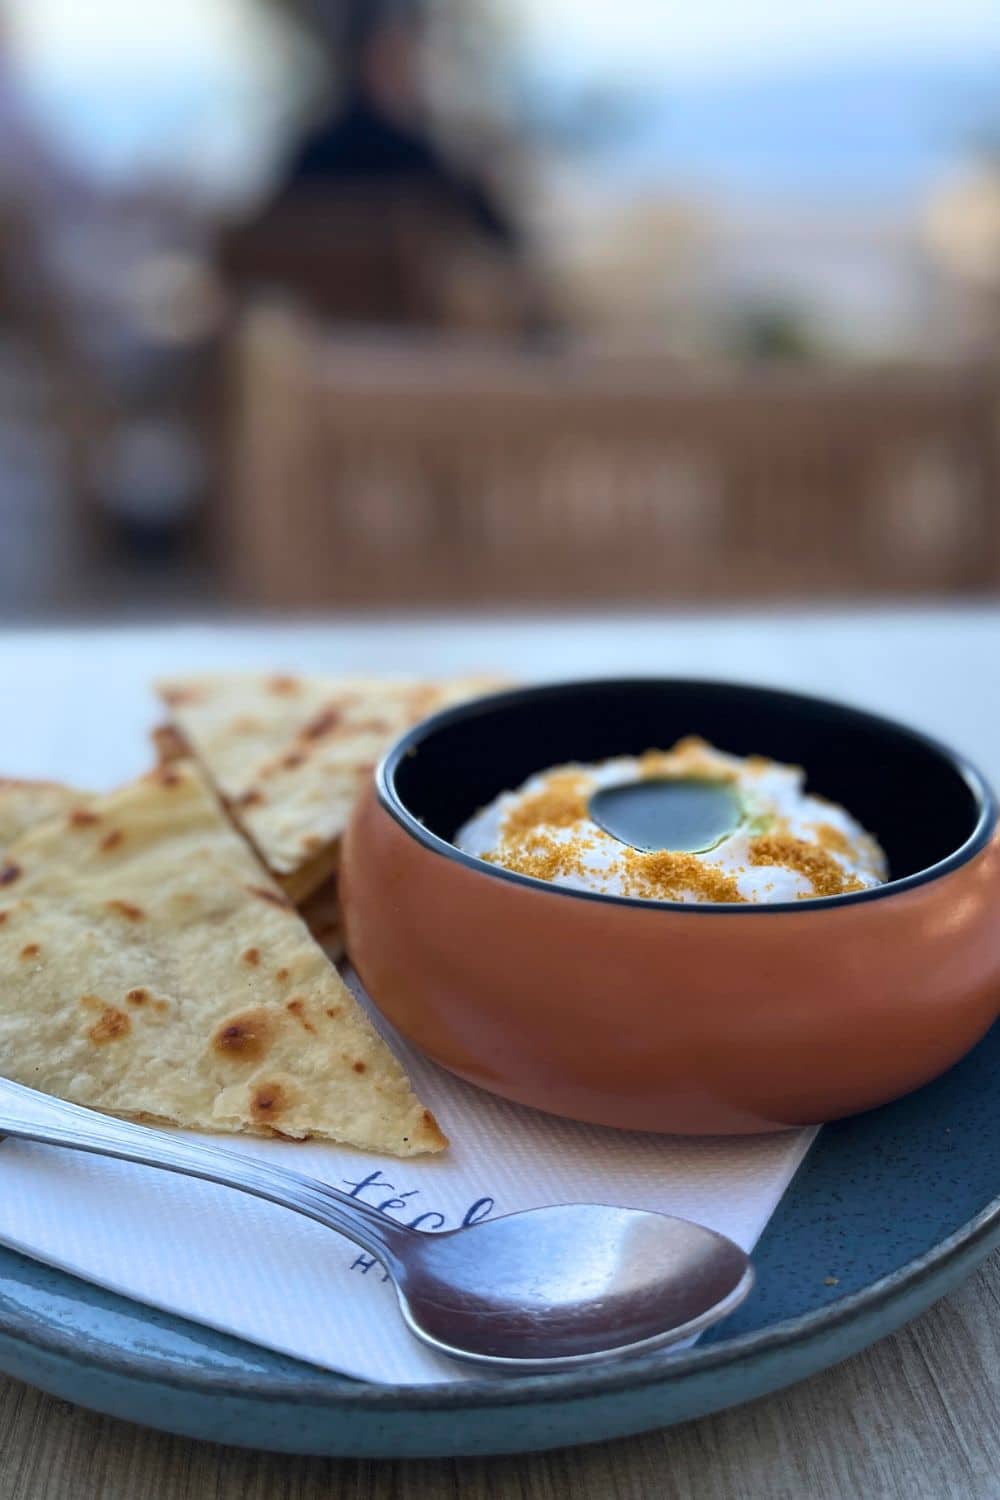 Close-up of a traditional Greek appetizer, taramasalata, served in a terracotta bowl with flatbread on a ceramic plate, ready for a taste of Hydra's local cuisine